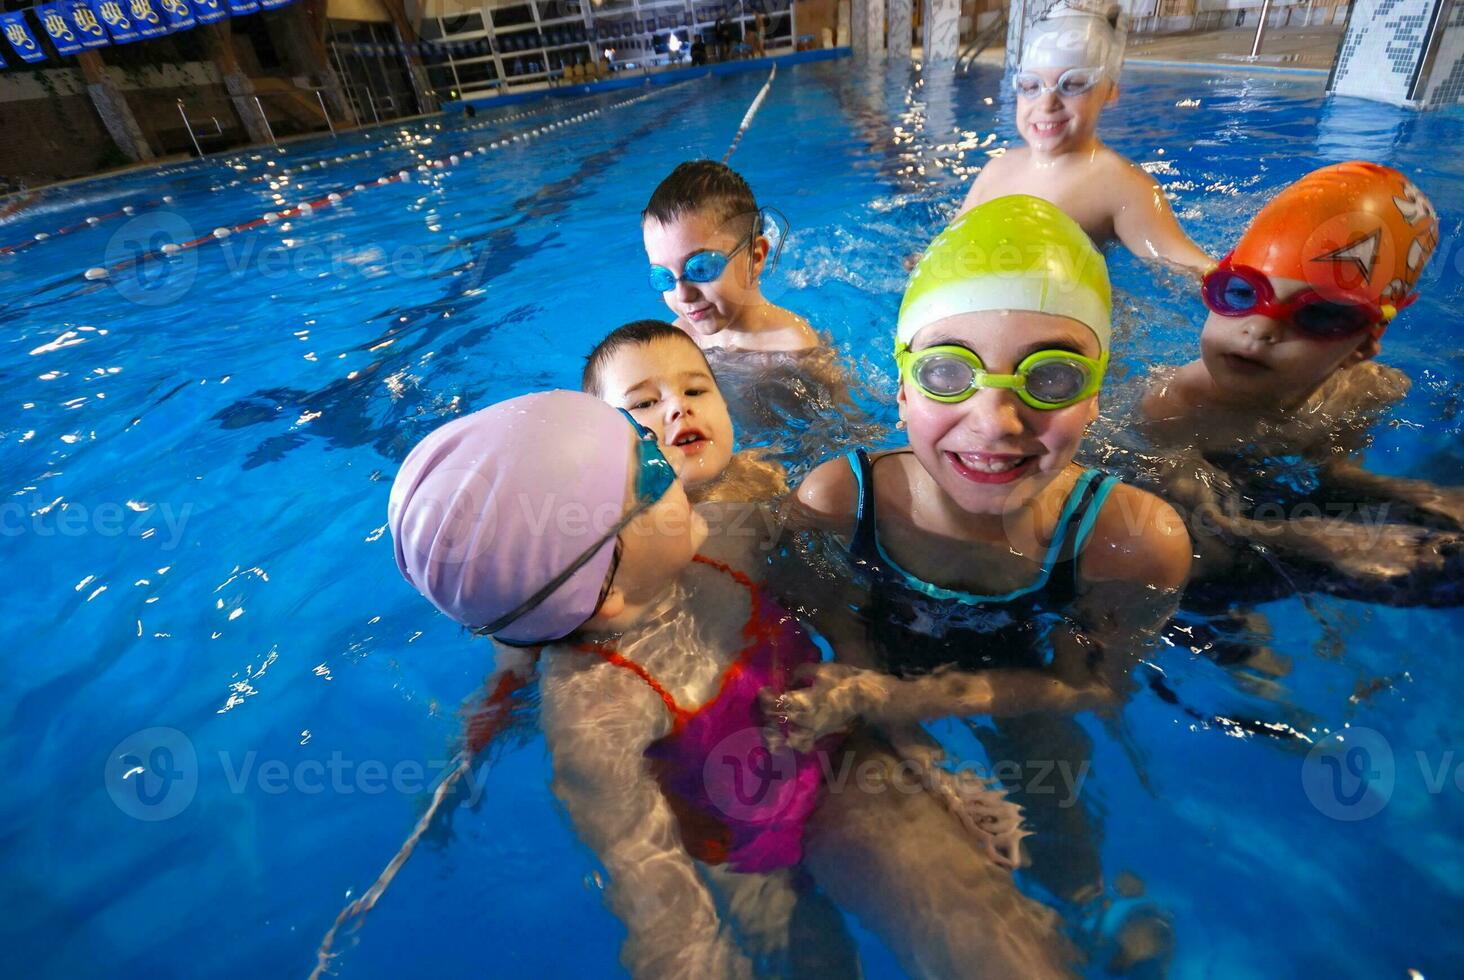 .happy moments at swimming pool with smilling childrens photo